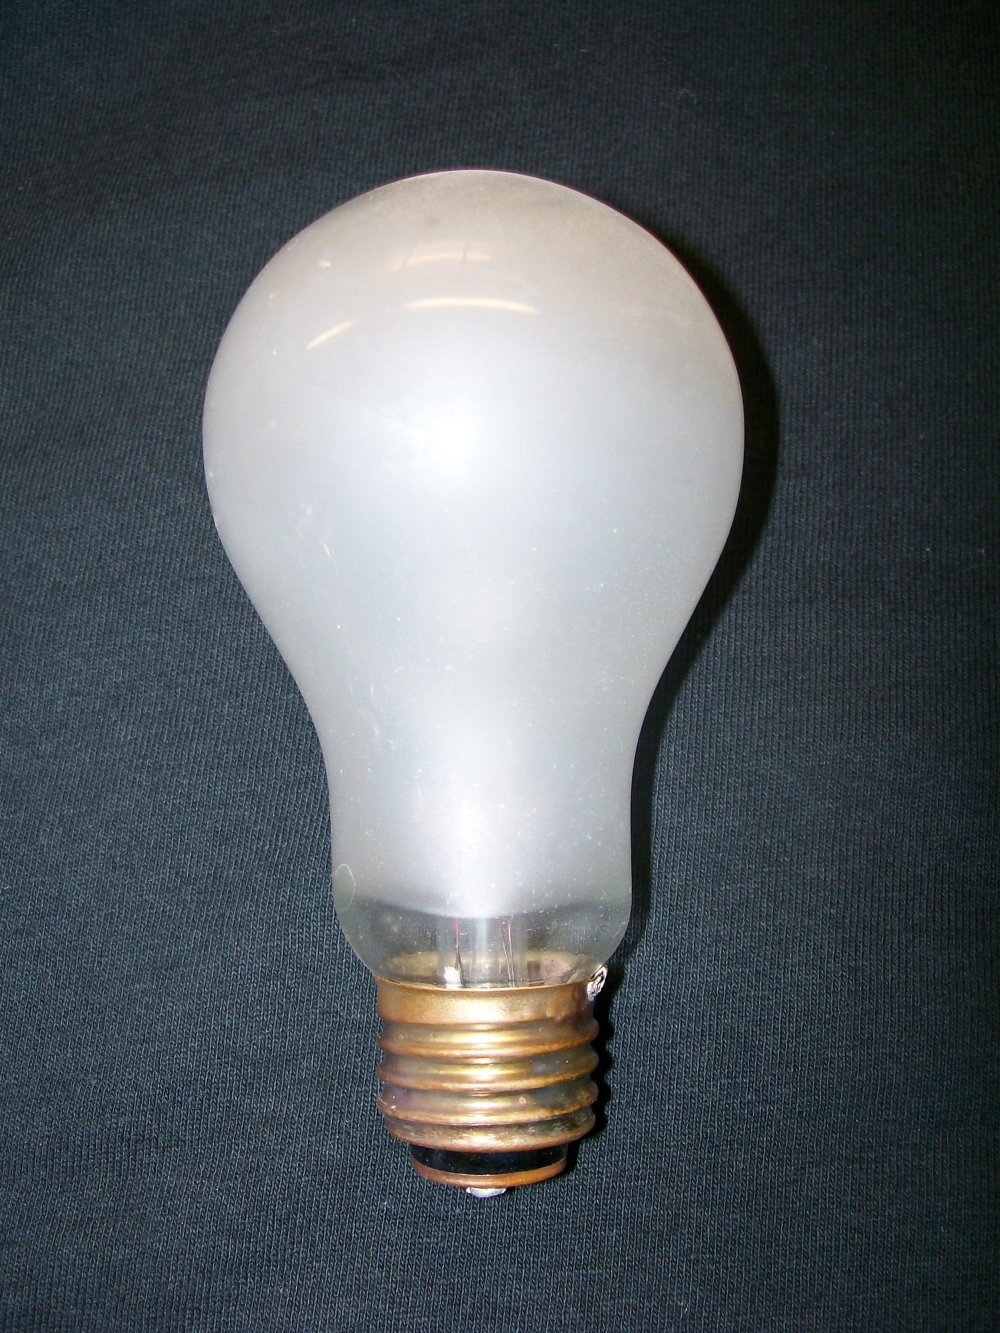 Modern electric light based on Swan's patent